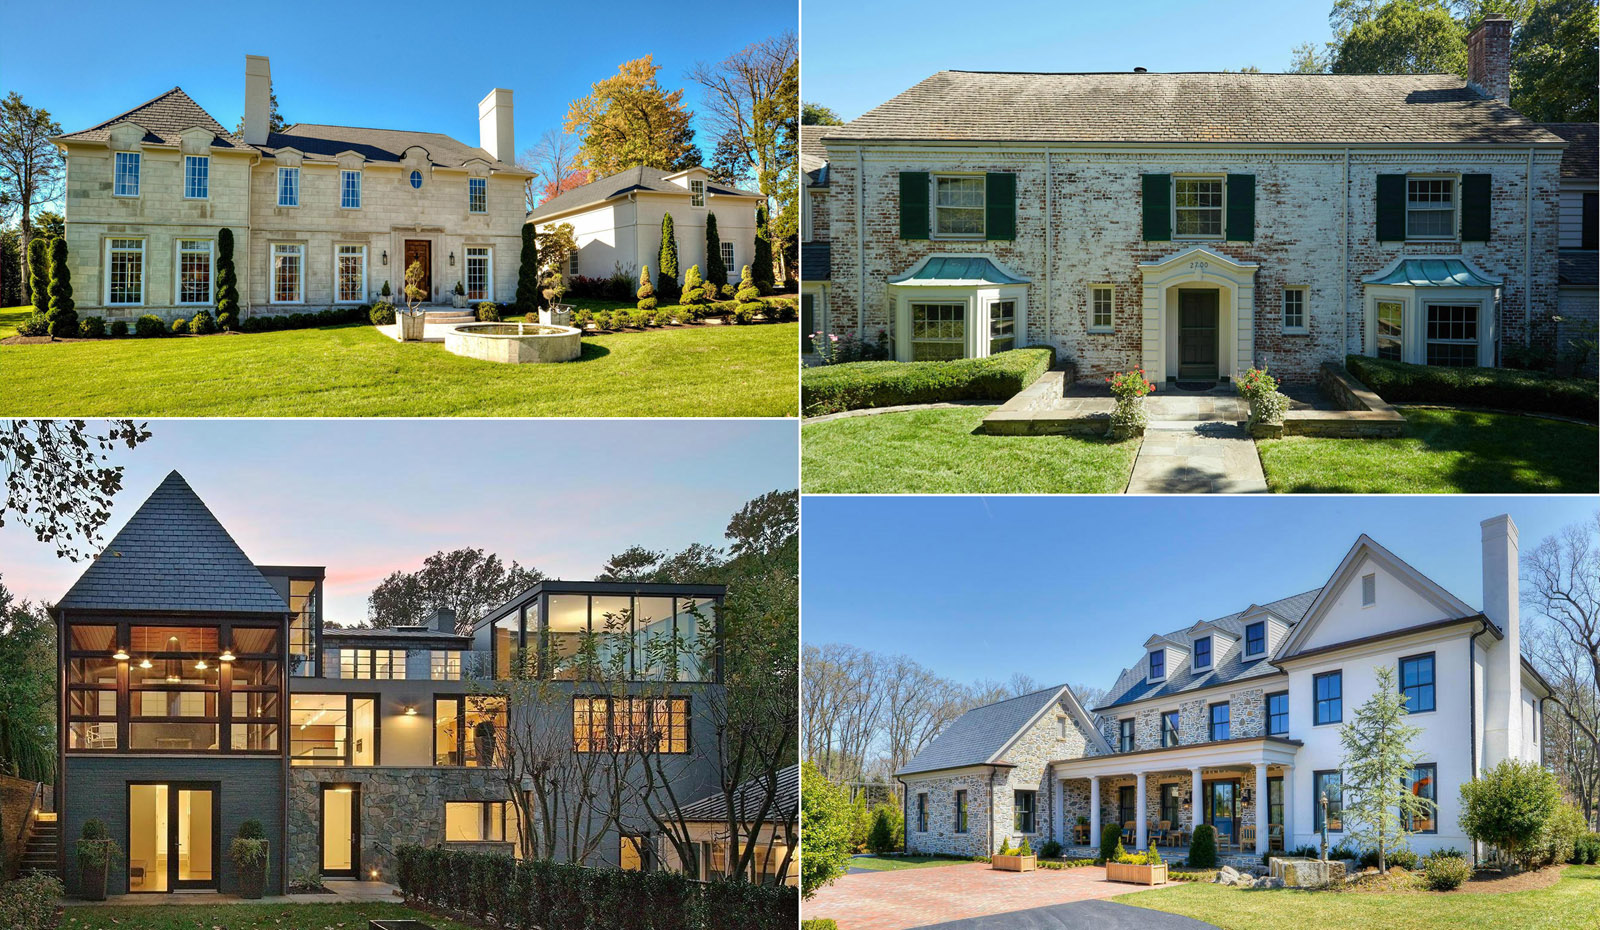 Comp of some of the most expensive houses that sold in July 2016. All courtesy of MRIS listing service. 